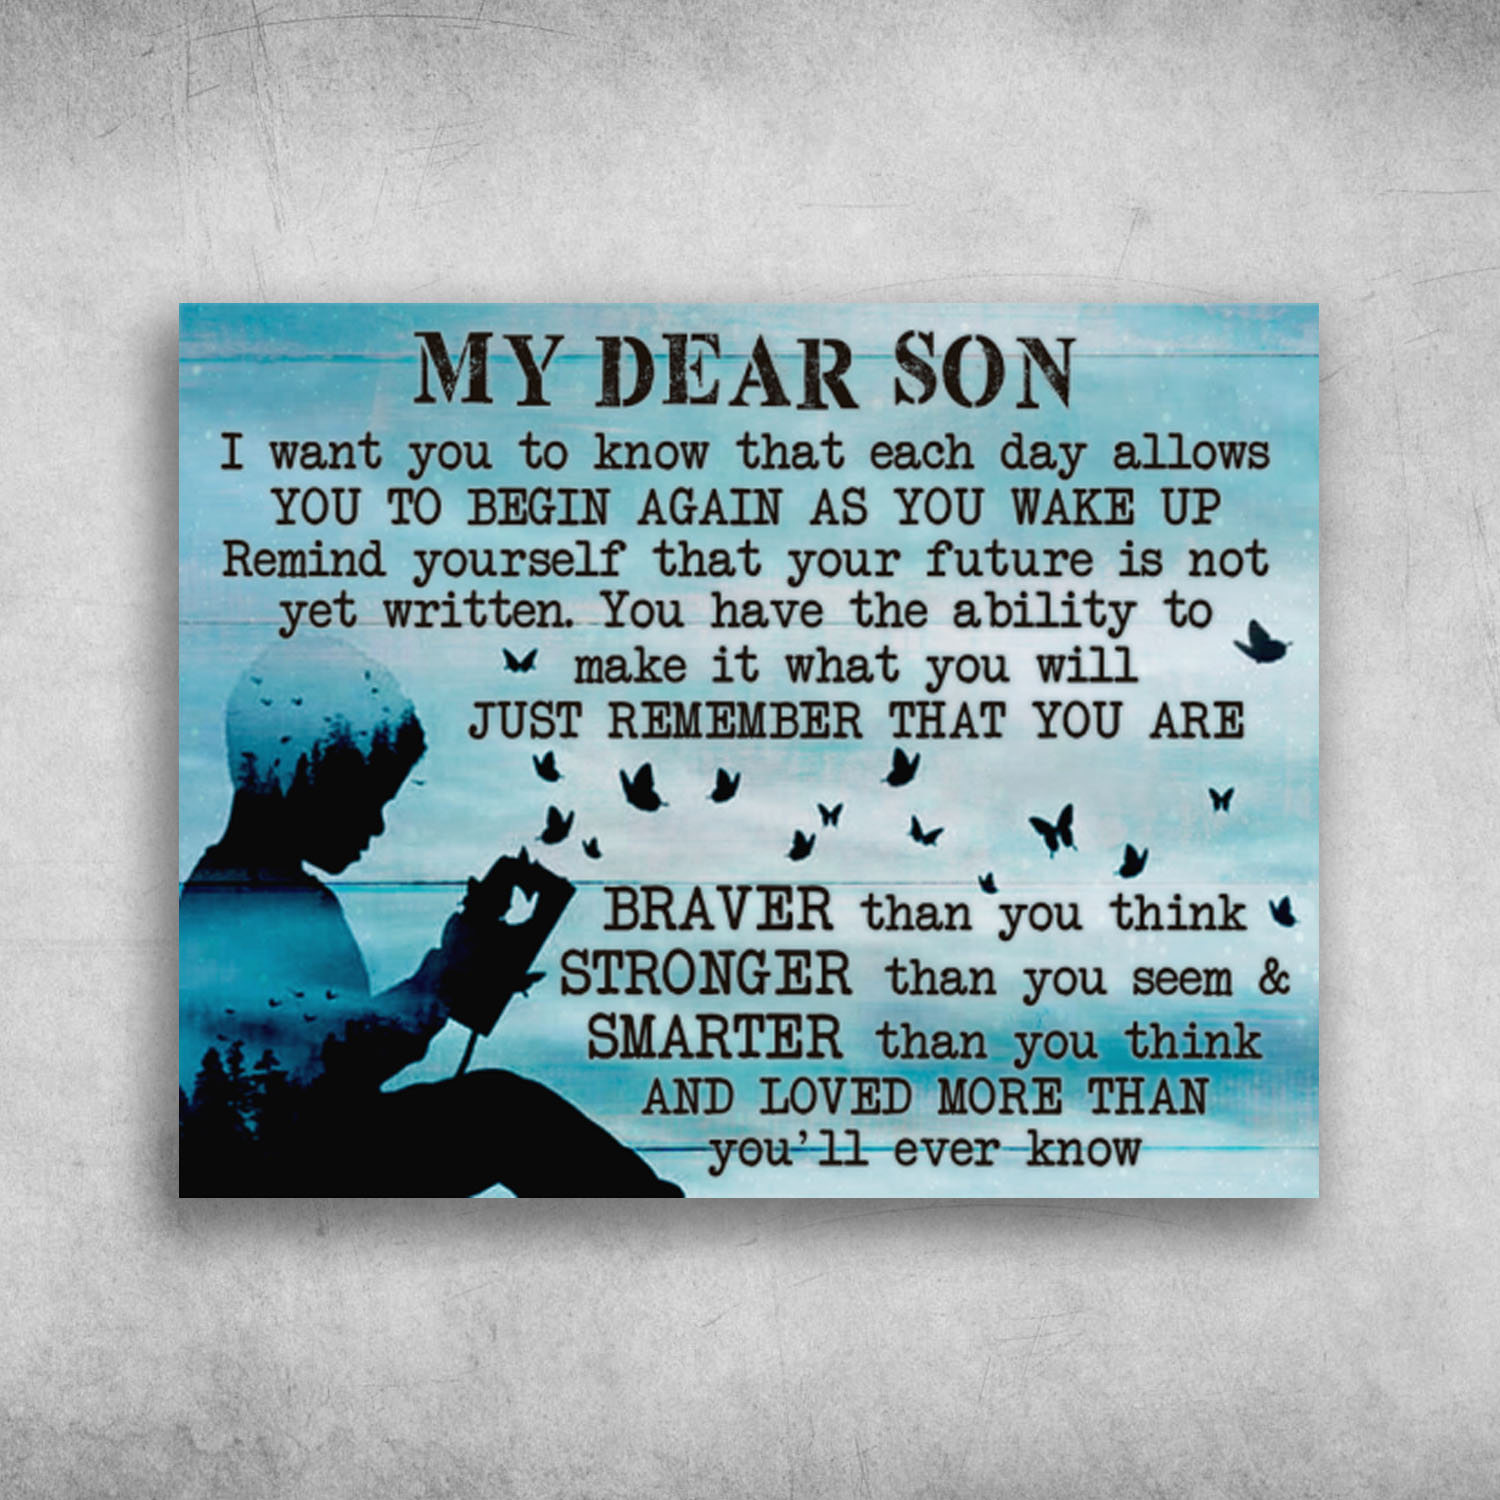 My Dear Son Just Remember That You Are Braver Than You Think